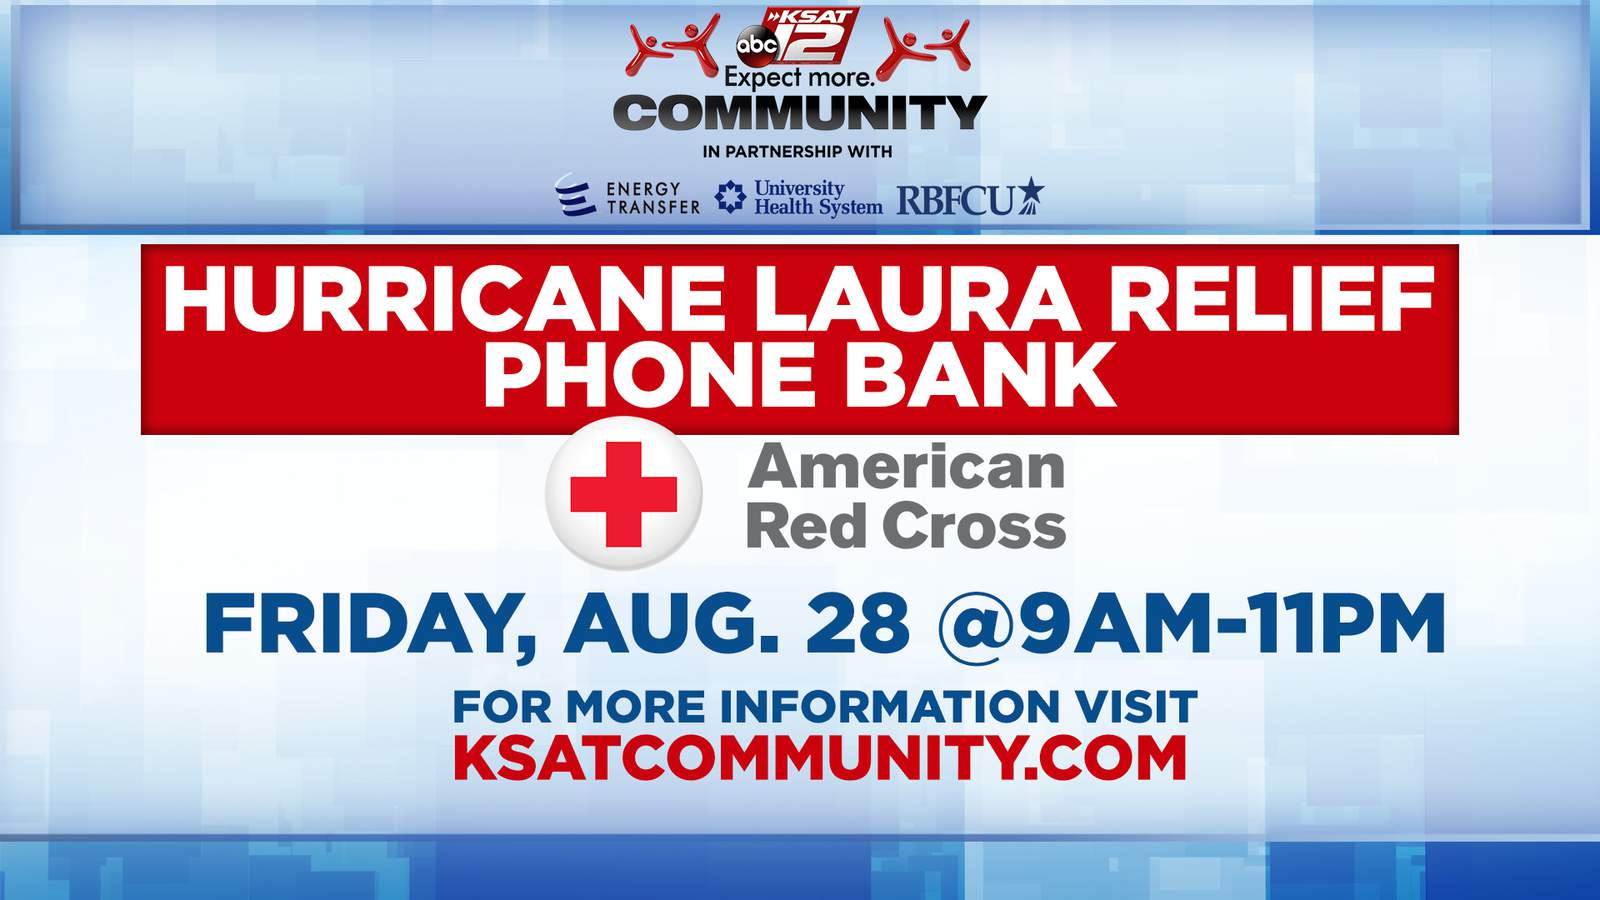 KSAT Community Hurricane Laura Relief Phone Bank with the American Red Cross to be held Friday